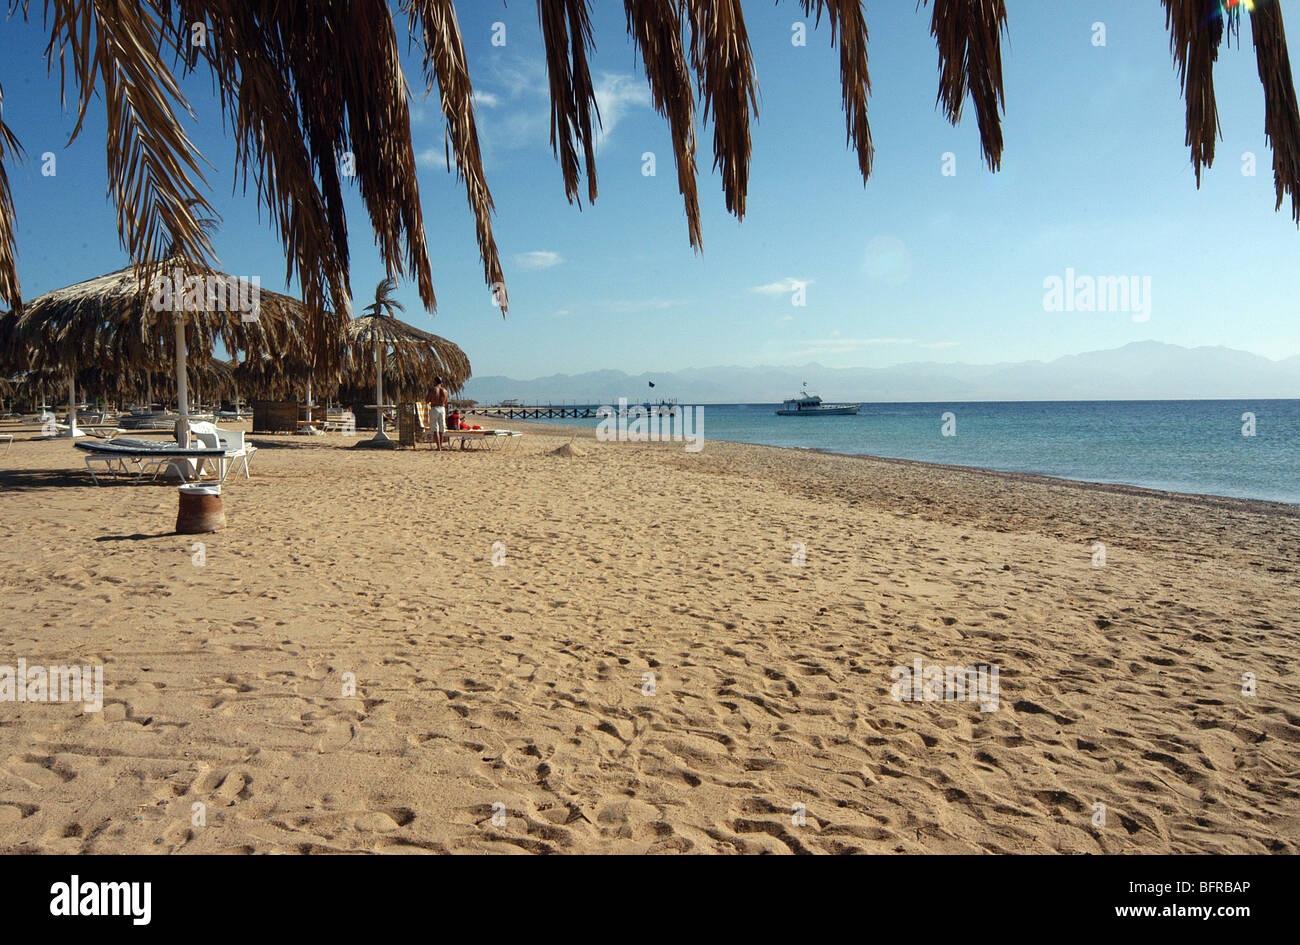 The beach at the Coral Hilton Hotel, Nuweiba, Egypt. Stock Photo